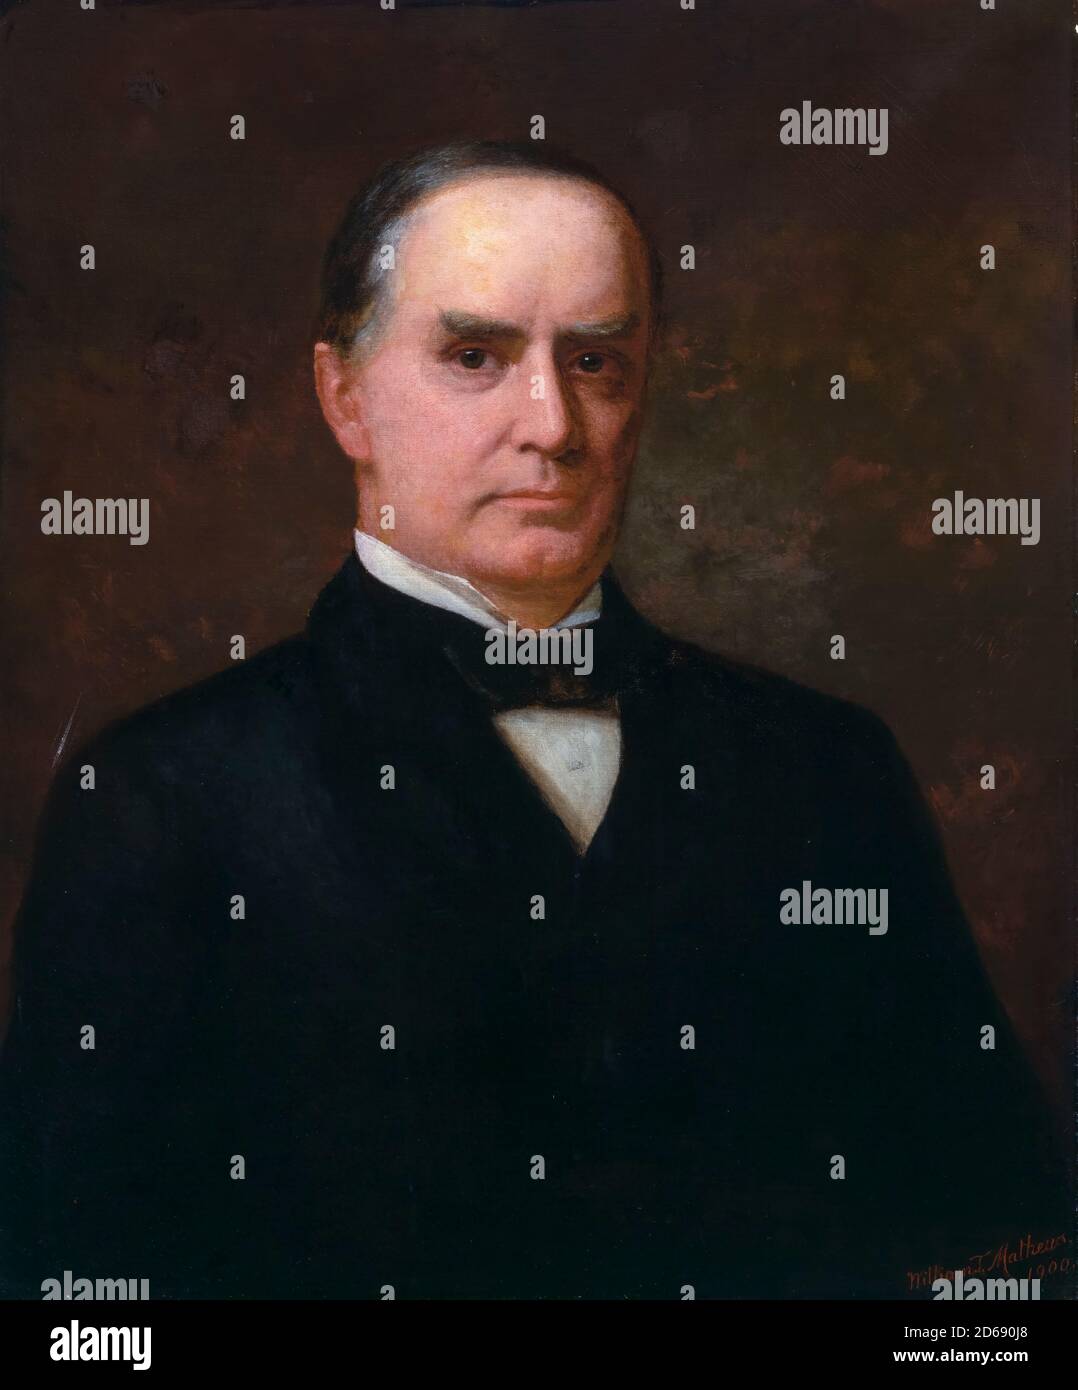 William McKinley (1843-1901), American military officer, 25th President of the United States, portrait painting by William Thomas Mathews, 1900 Stock Photo